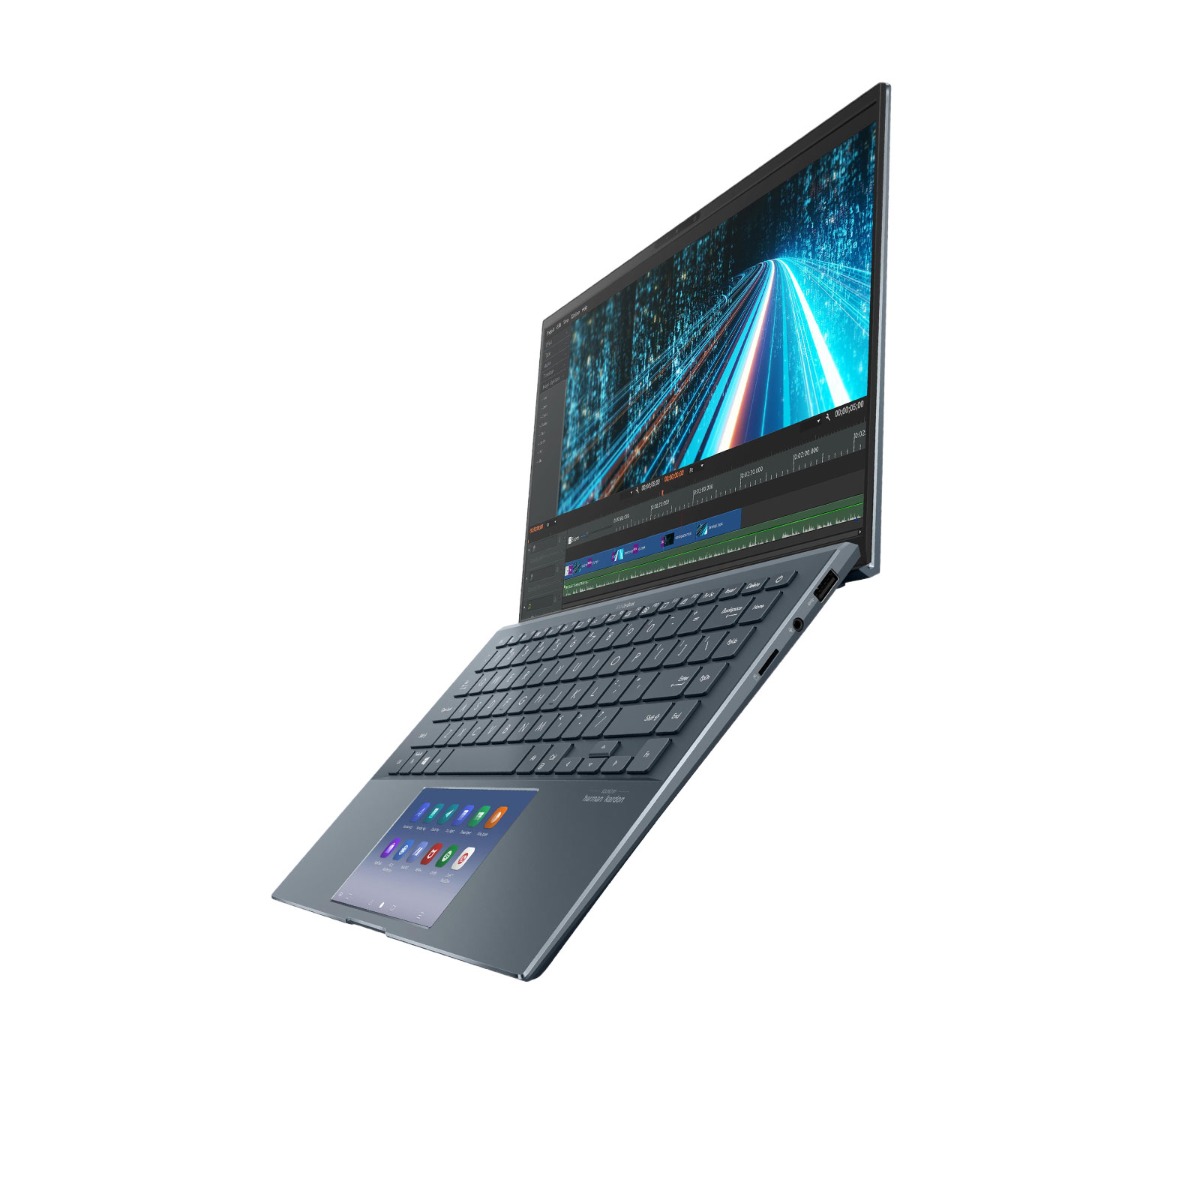 Asus Zenbook UX435EG Series 11th gen Grey Notebook, Intel Core I7-1165G7-Asus-UX435EG-I716512G1R-UX435EG-I716512G1R-Laptops | LaptopSA.co.za a division of the notebook company 